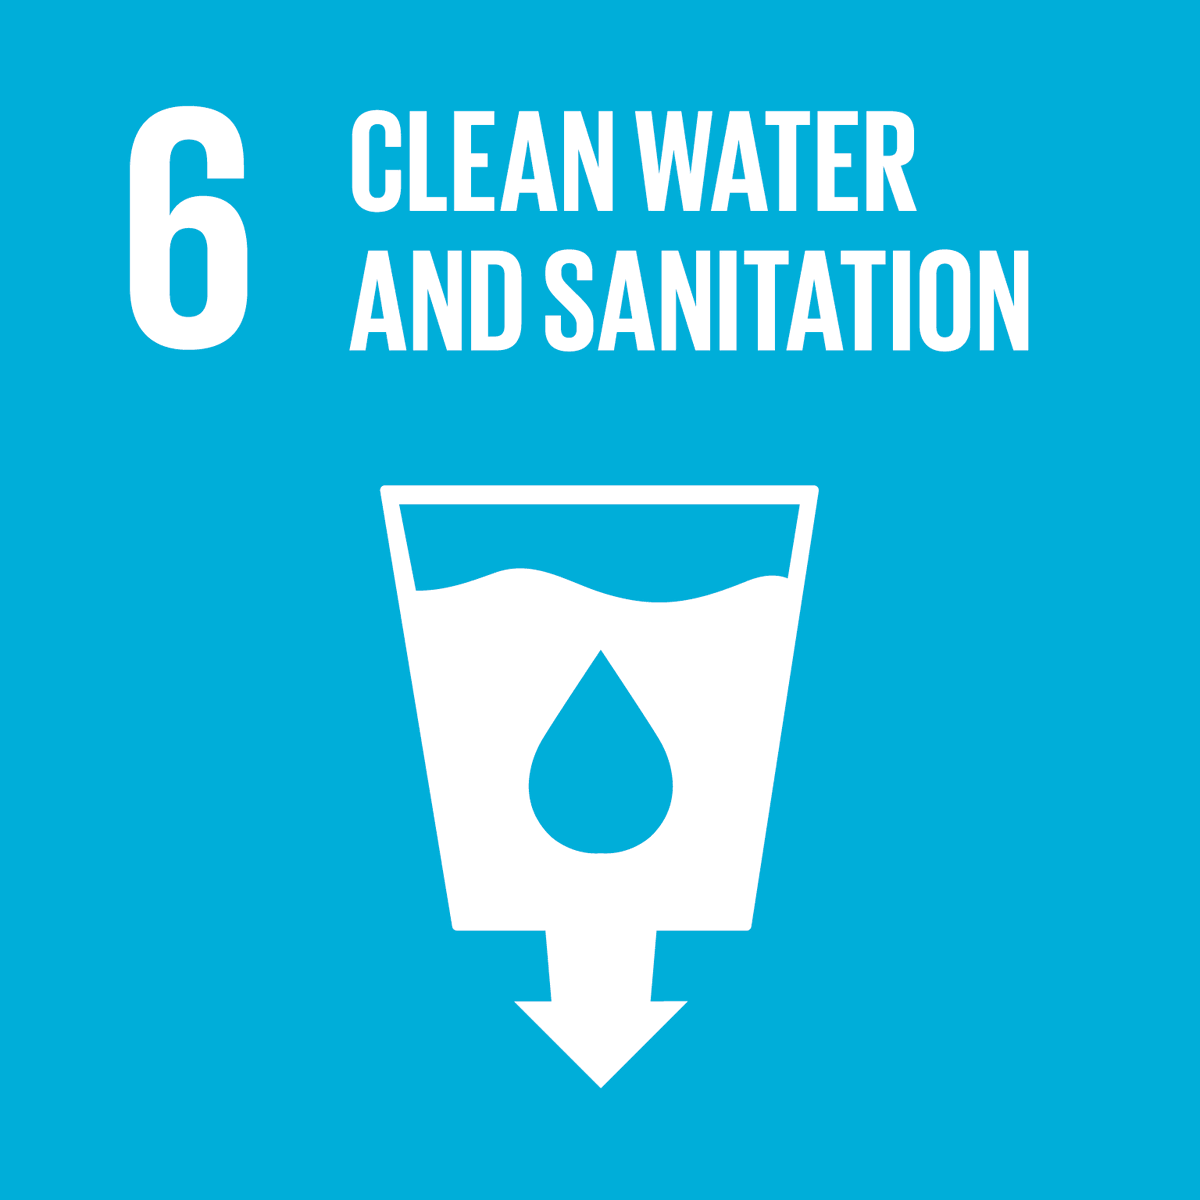 Goal 6: Clean water and sanitationShe takes care of nature importance of Clean water and sanitation in her shoot.